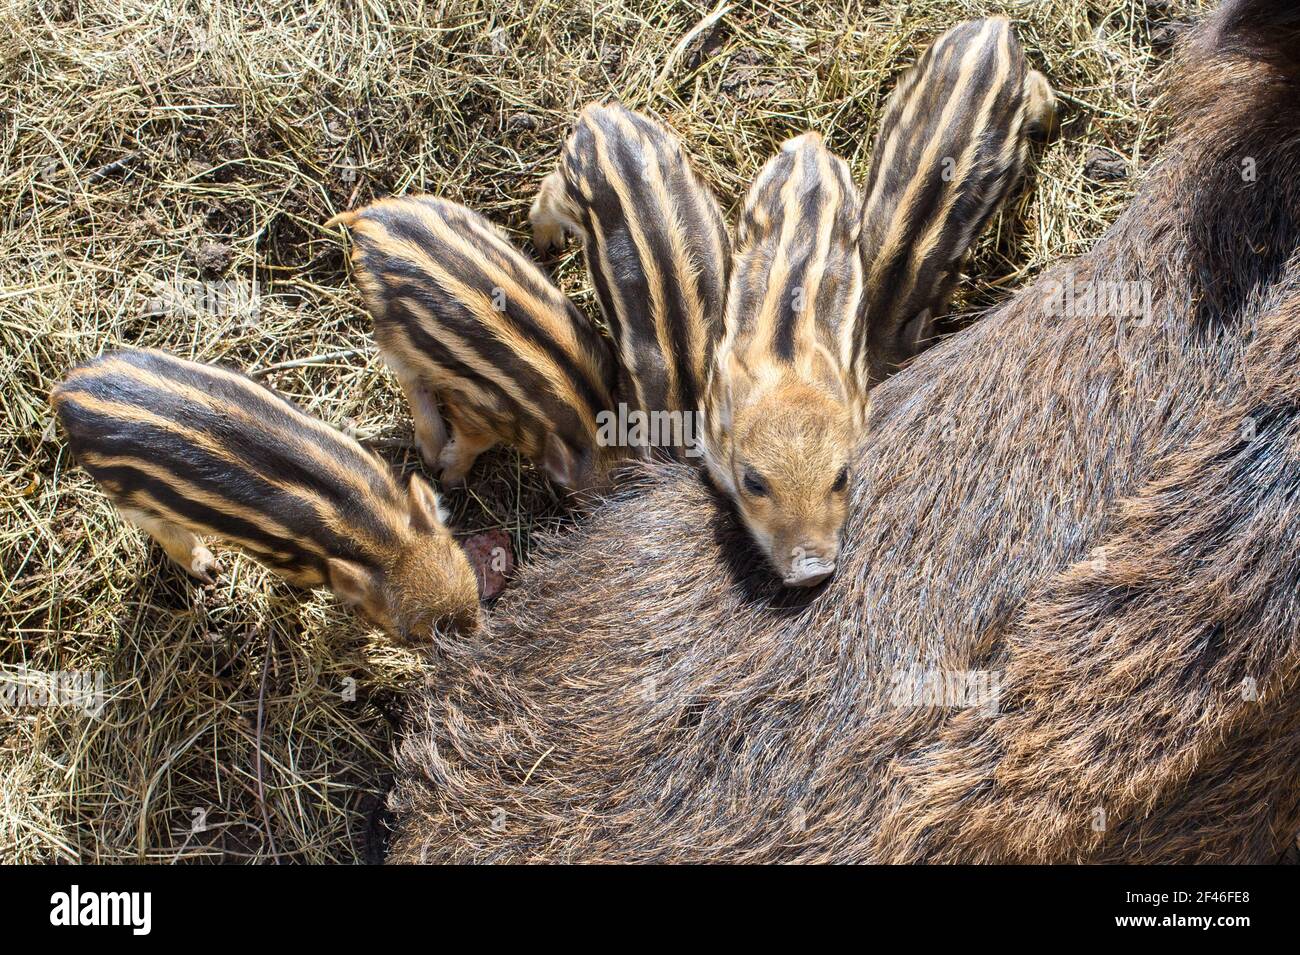 Halberstadt, Germany. 19th Mar, 2021. A doe suckles the wild boar offspring in Halberstadt Zoo. The young pigs are only a few days old and can be easily observed in their outdoor enclosure. A total of seven animals were born in the zoo. The frenzy season, i.e. the mating season, is mainly in the winter months, so that with the spring, the freshet season begins. Credit: Klaus-Dietmar Gabbert/dpa-Zentralbild/ZB/dpa/Alamy Live News Stock Photo